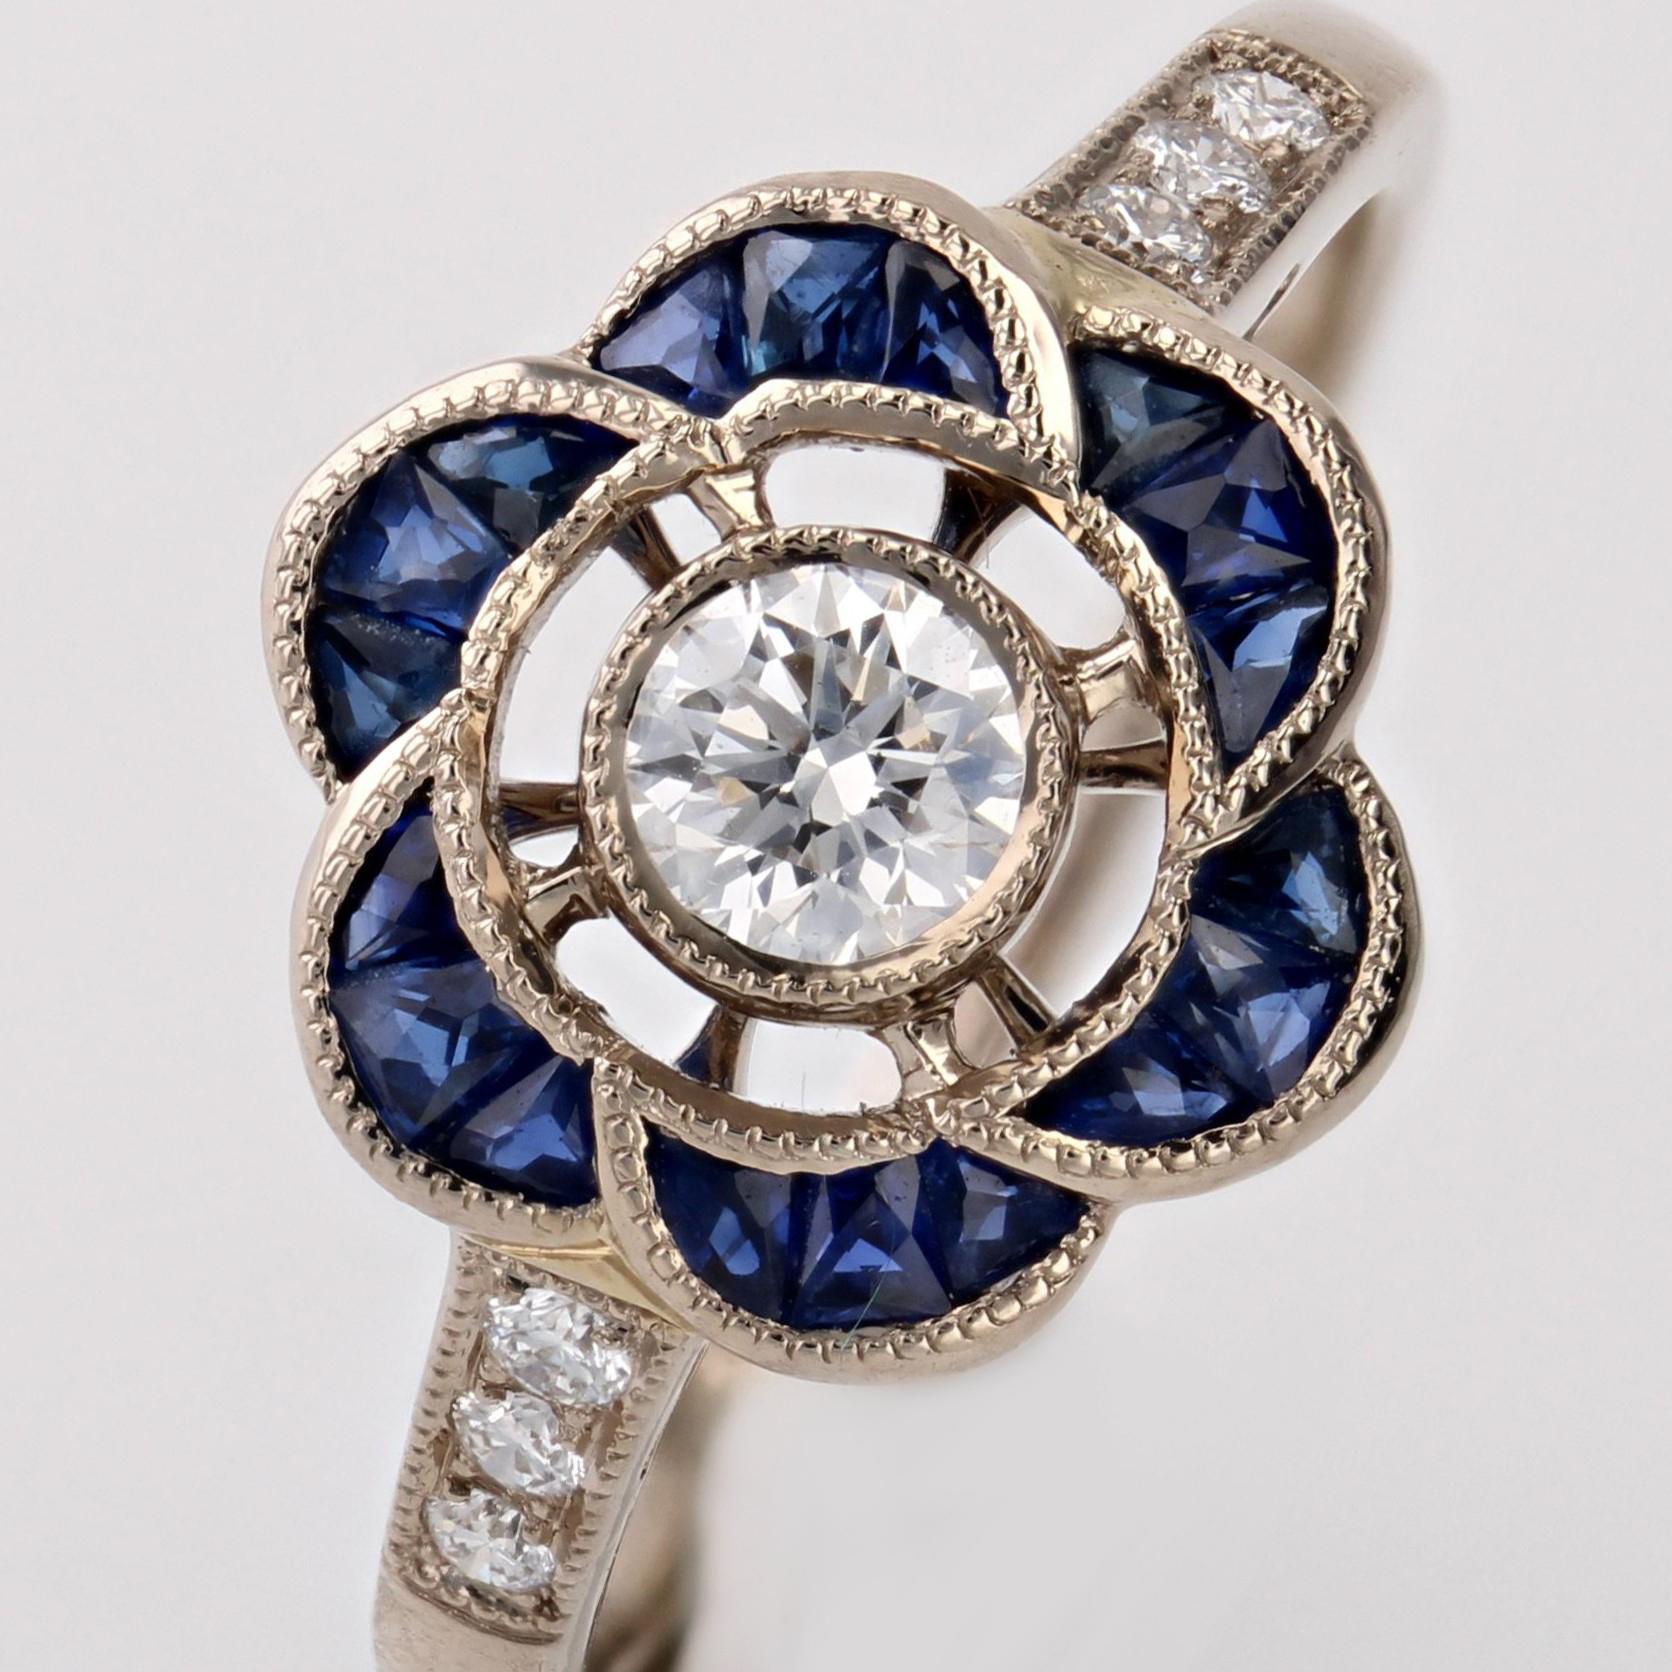 New Art Deco Style Calibrated Sapphires Diamonds 18 K White Gold Flower Ring For Sale 4